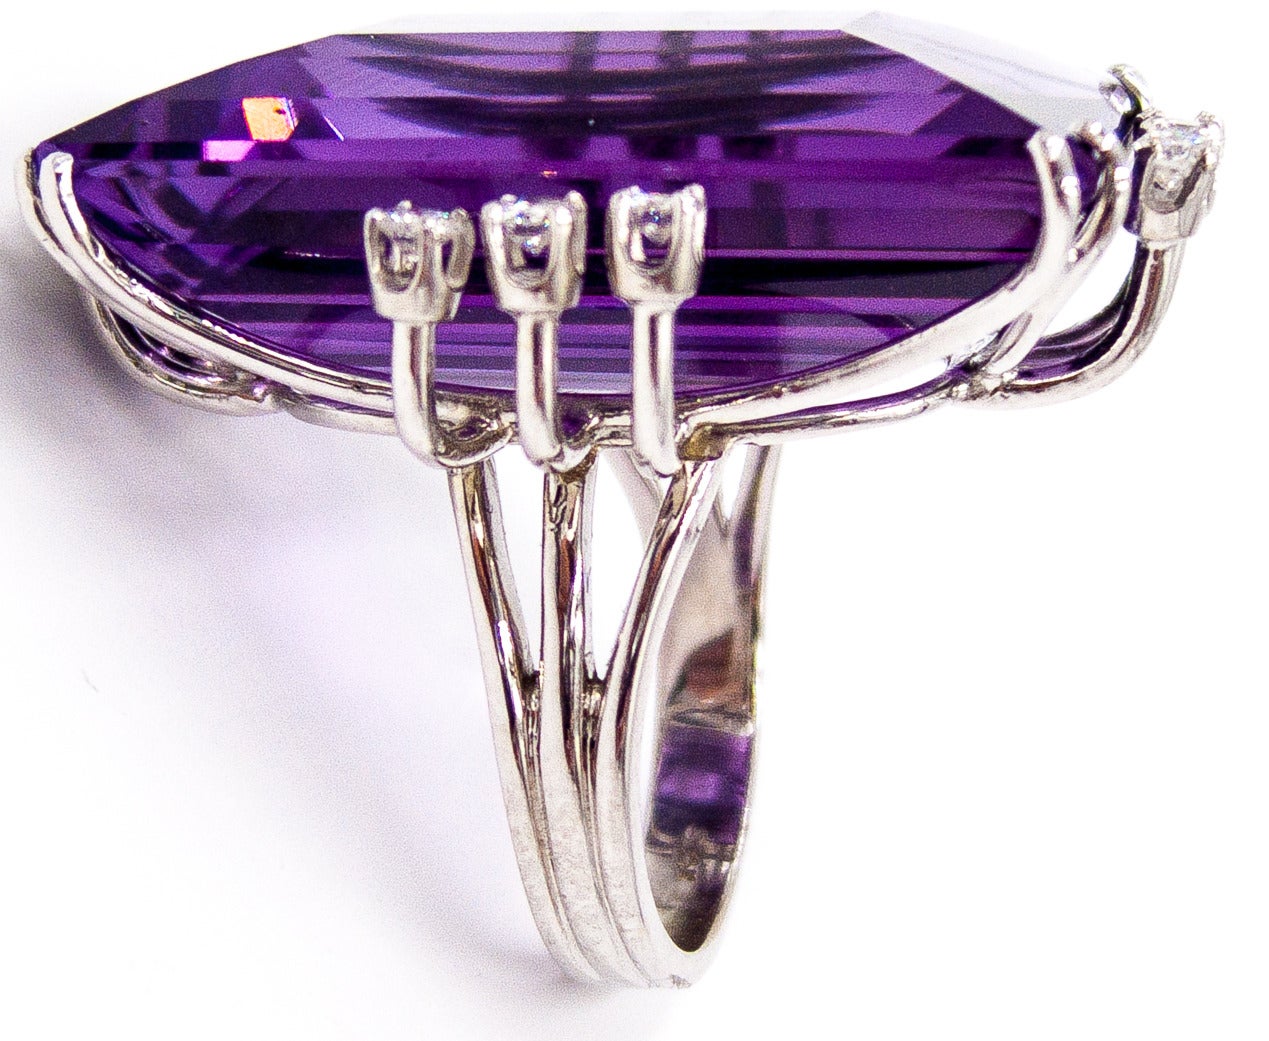 An impressive and elegant ring set in 14 karat white gold  with a large, brilliant, ice-skating rink of an amethyst - approximately 50 carats -  accented on all four sides by petite diamonds.  It's made for a size 7 1/2 finger but can easily be